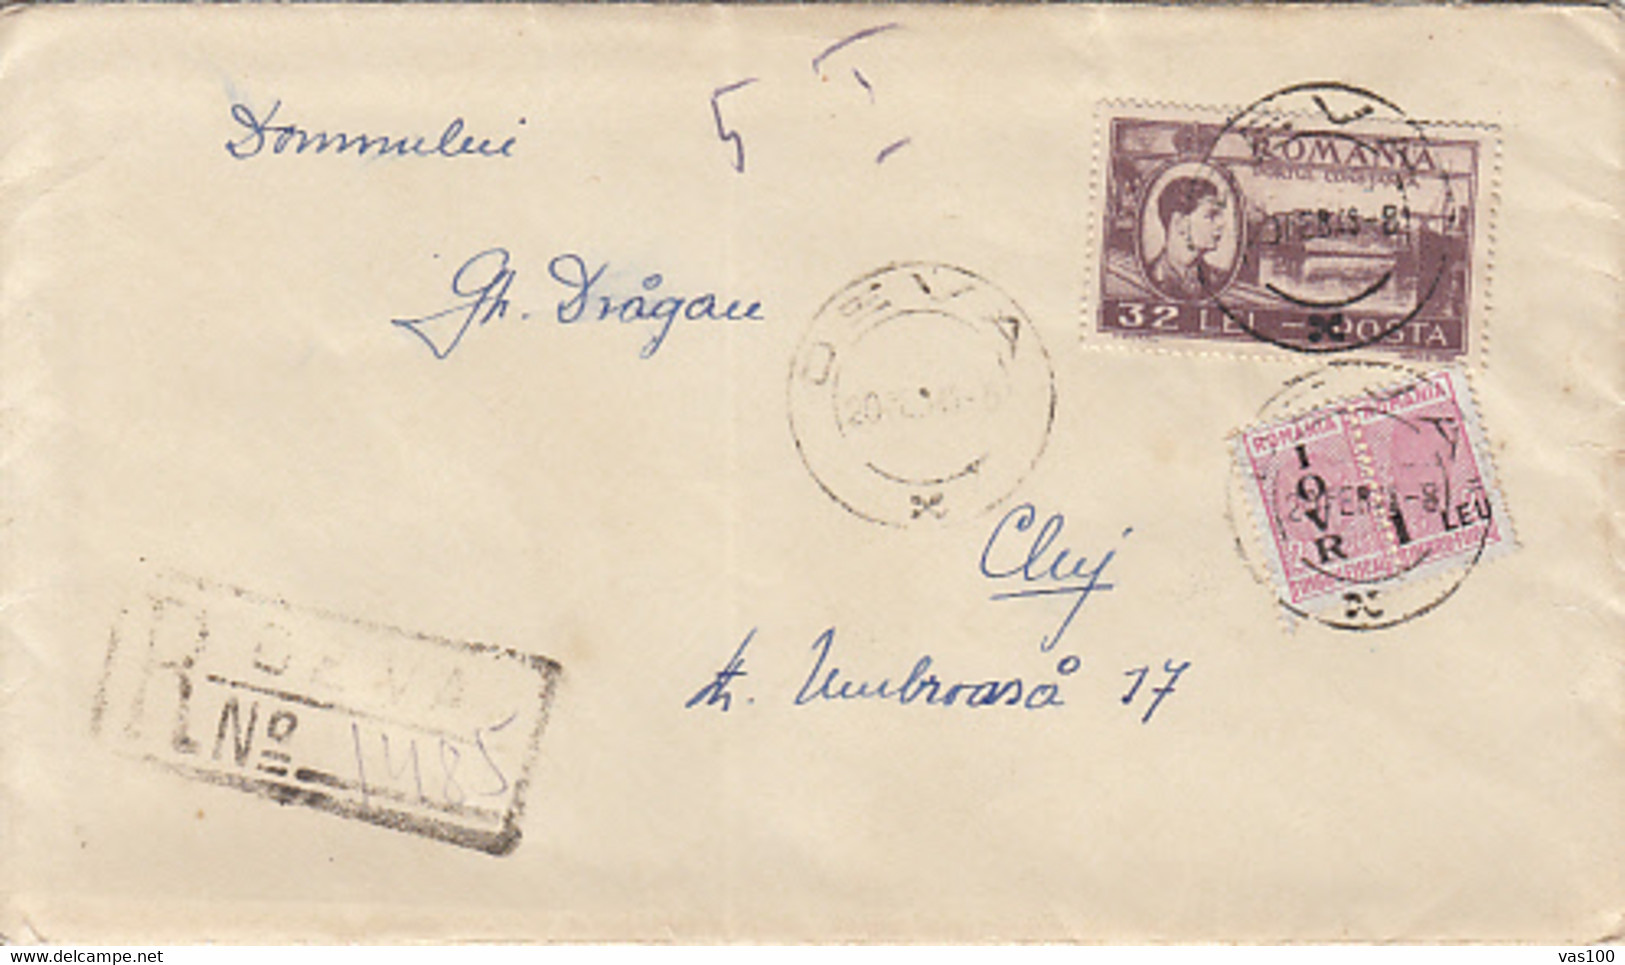 IOVR OVERPRINT REVENUE STAMP, KING MICHAEL, CONSTANTA HARBOUR, SHIP, STAMPS ON REGISTERED COVER, 1948, ROMANIA - Fiscali